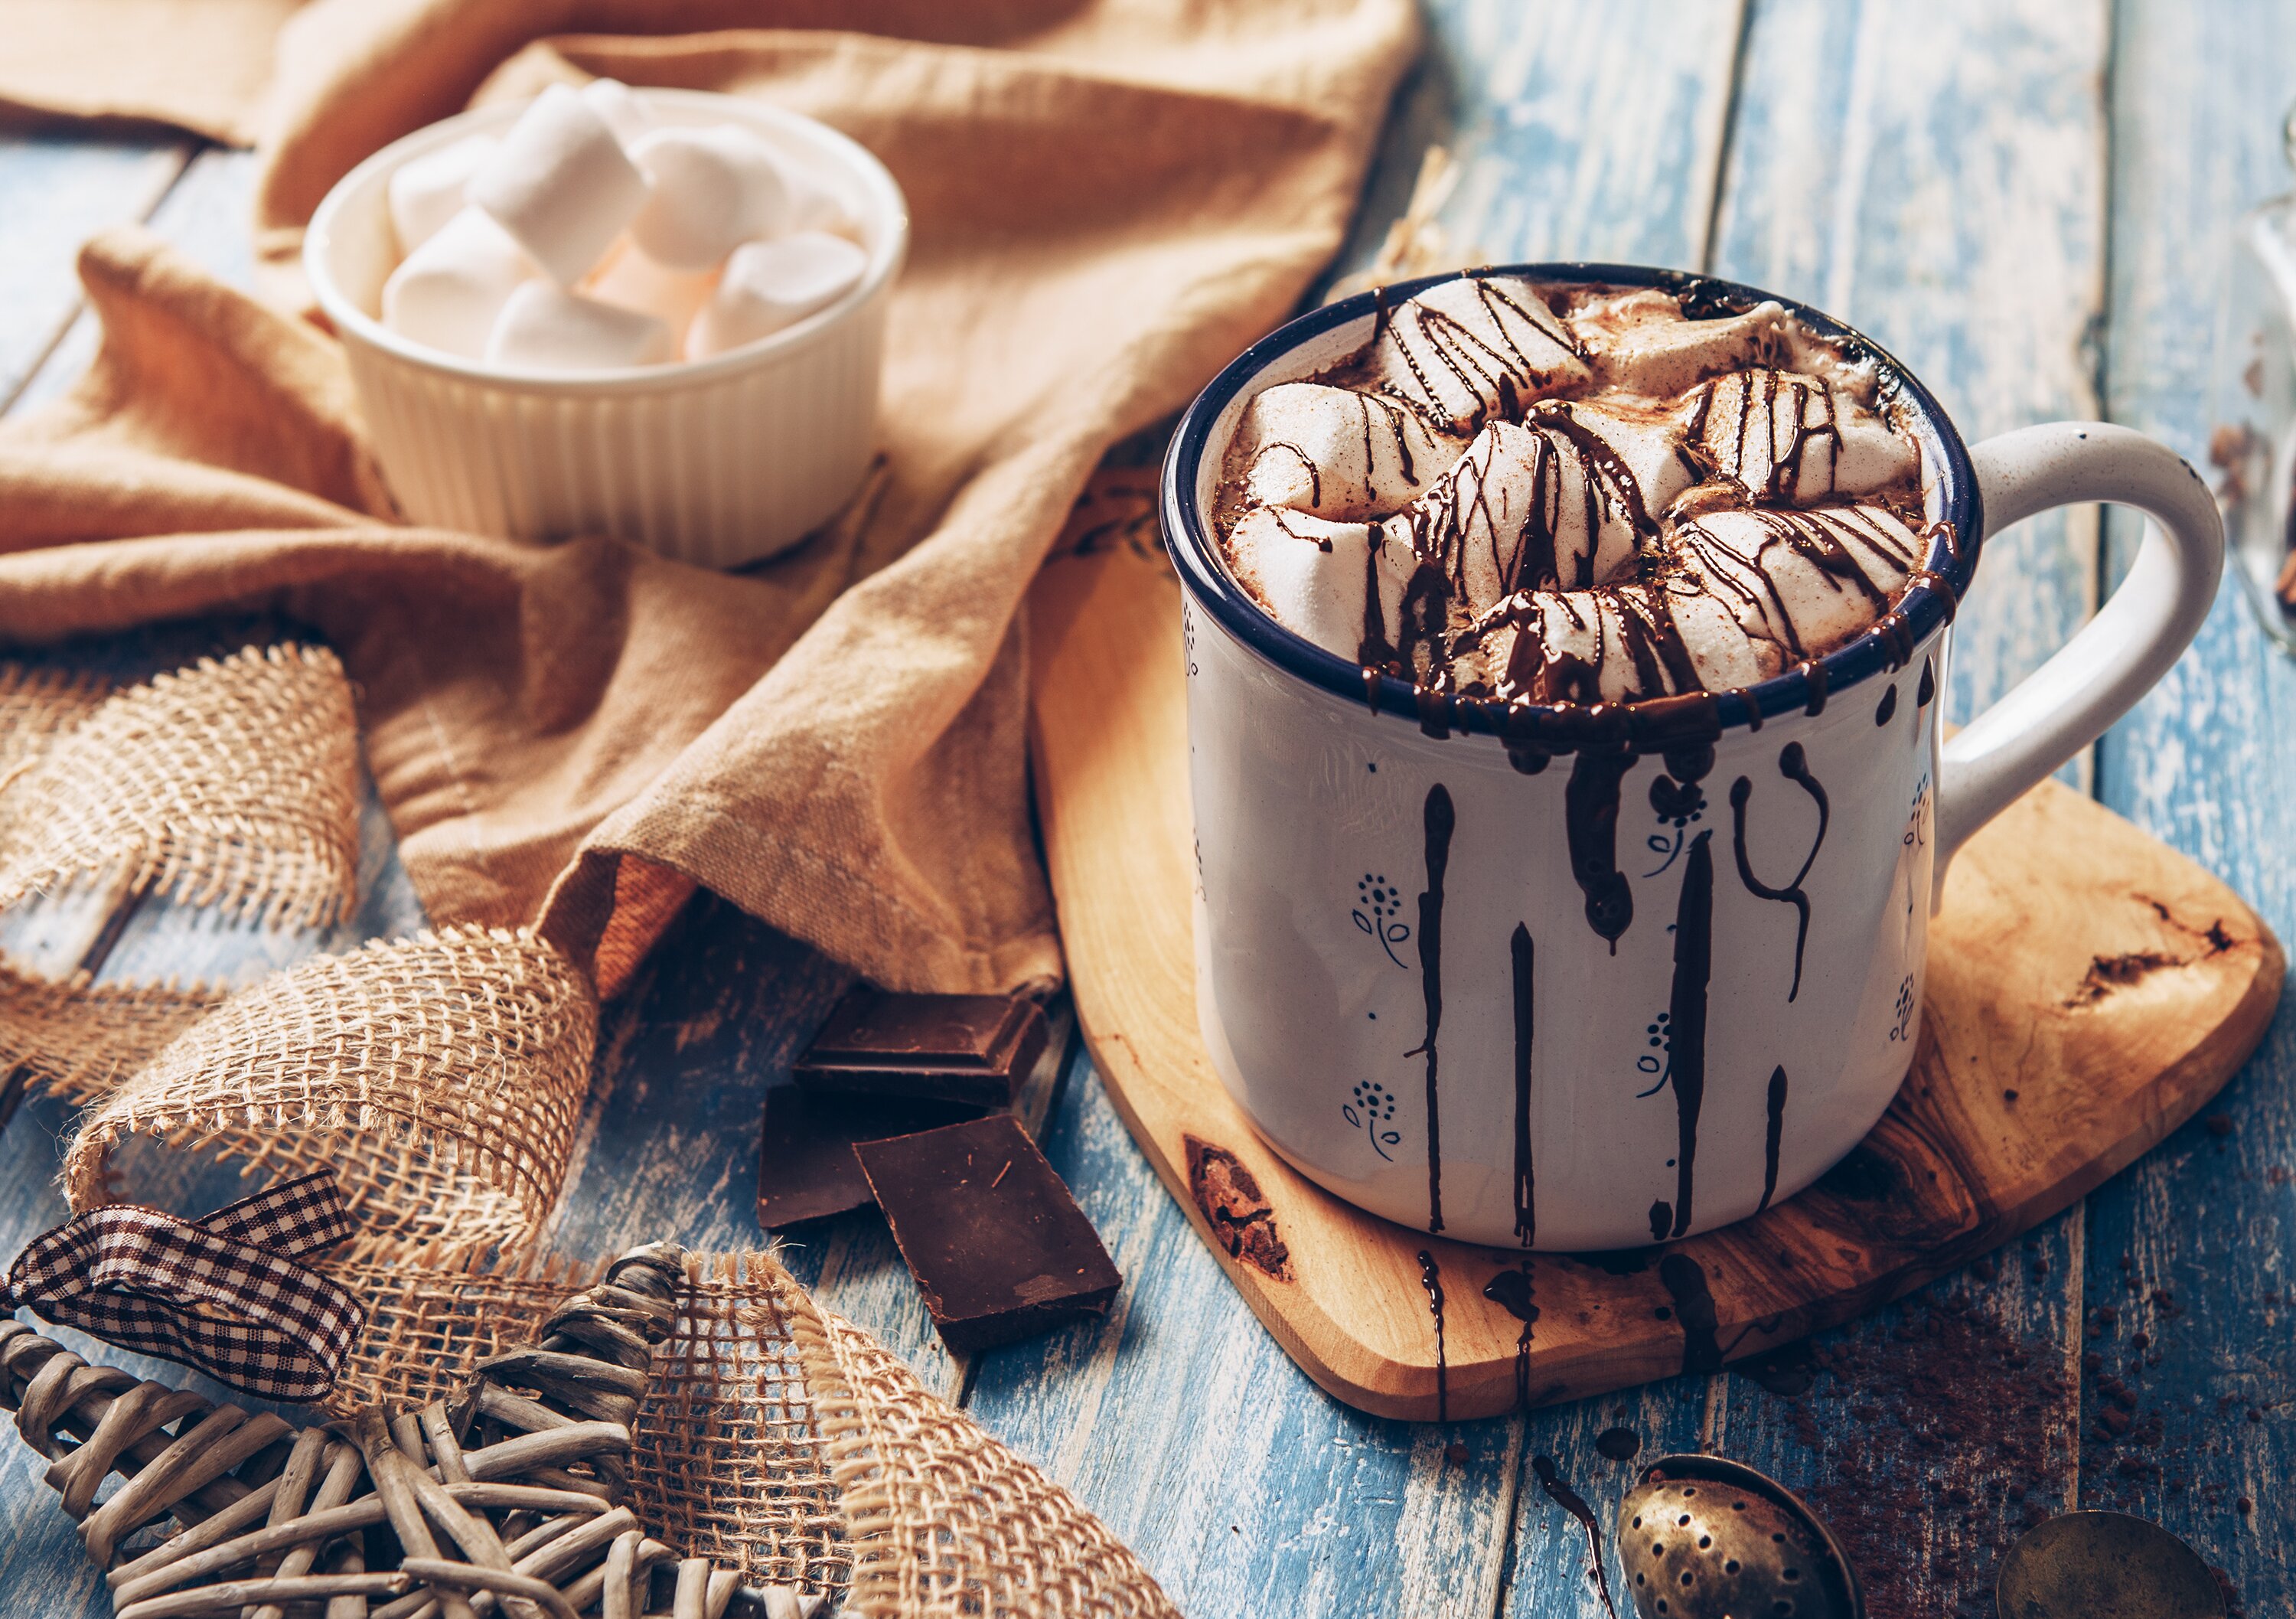 How to sweeten your hot chocolate offering